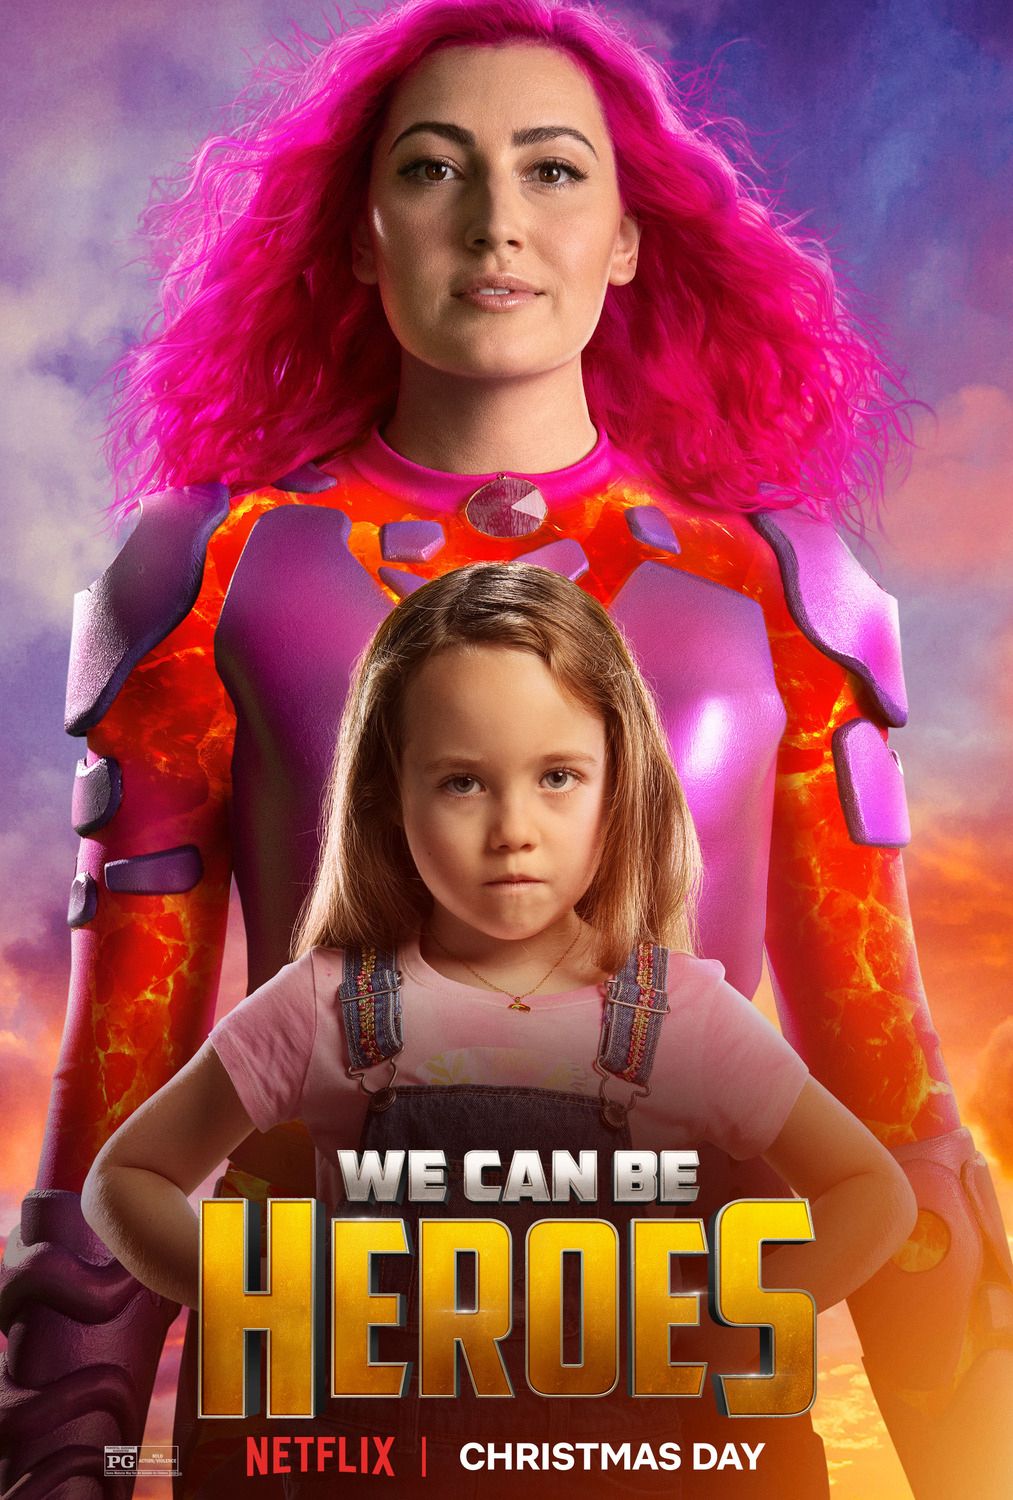 We Can Be Heroes Character Poster #2